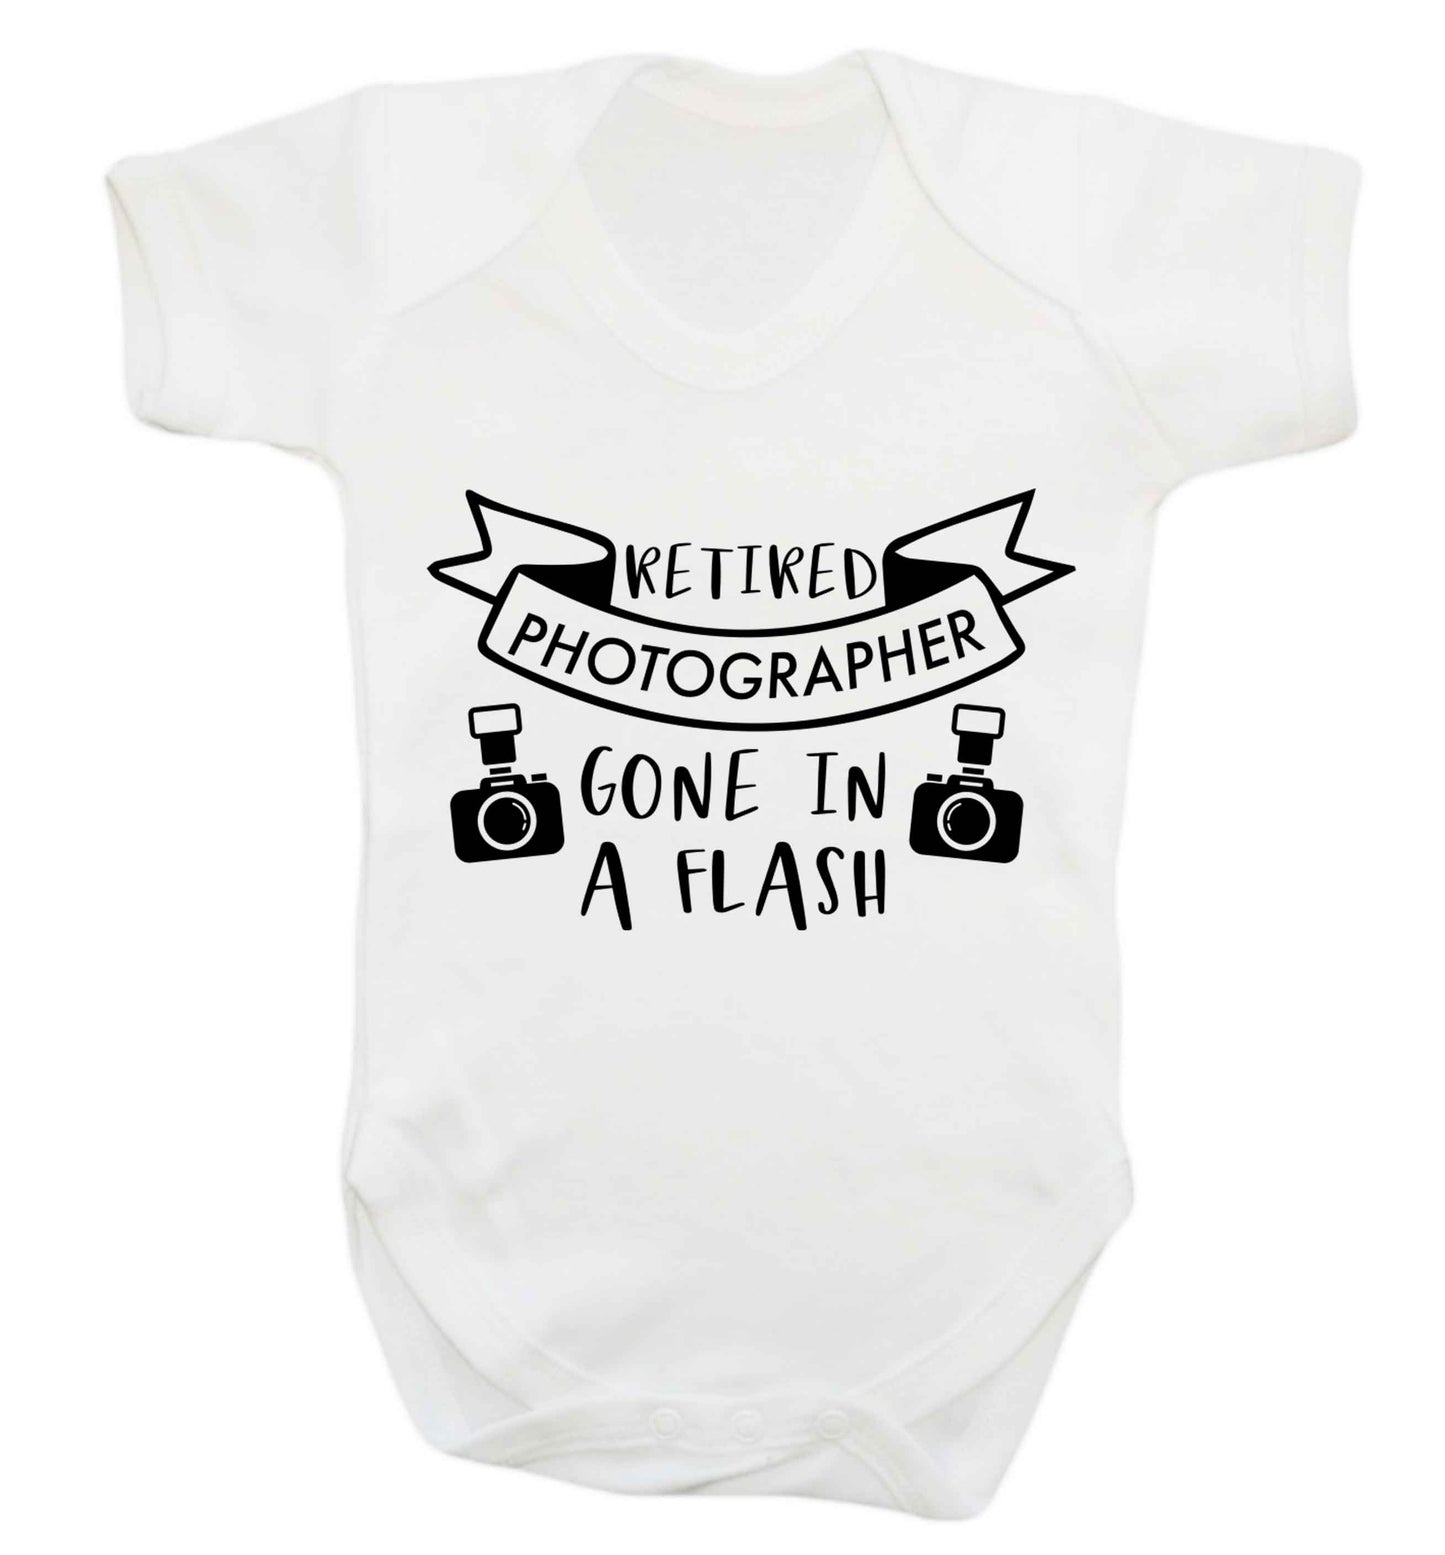 Retired photographer gone in a flash Baby Vest white 18-24 months